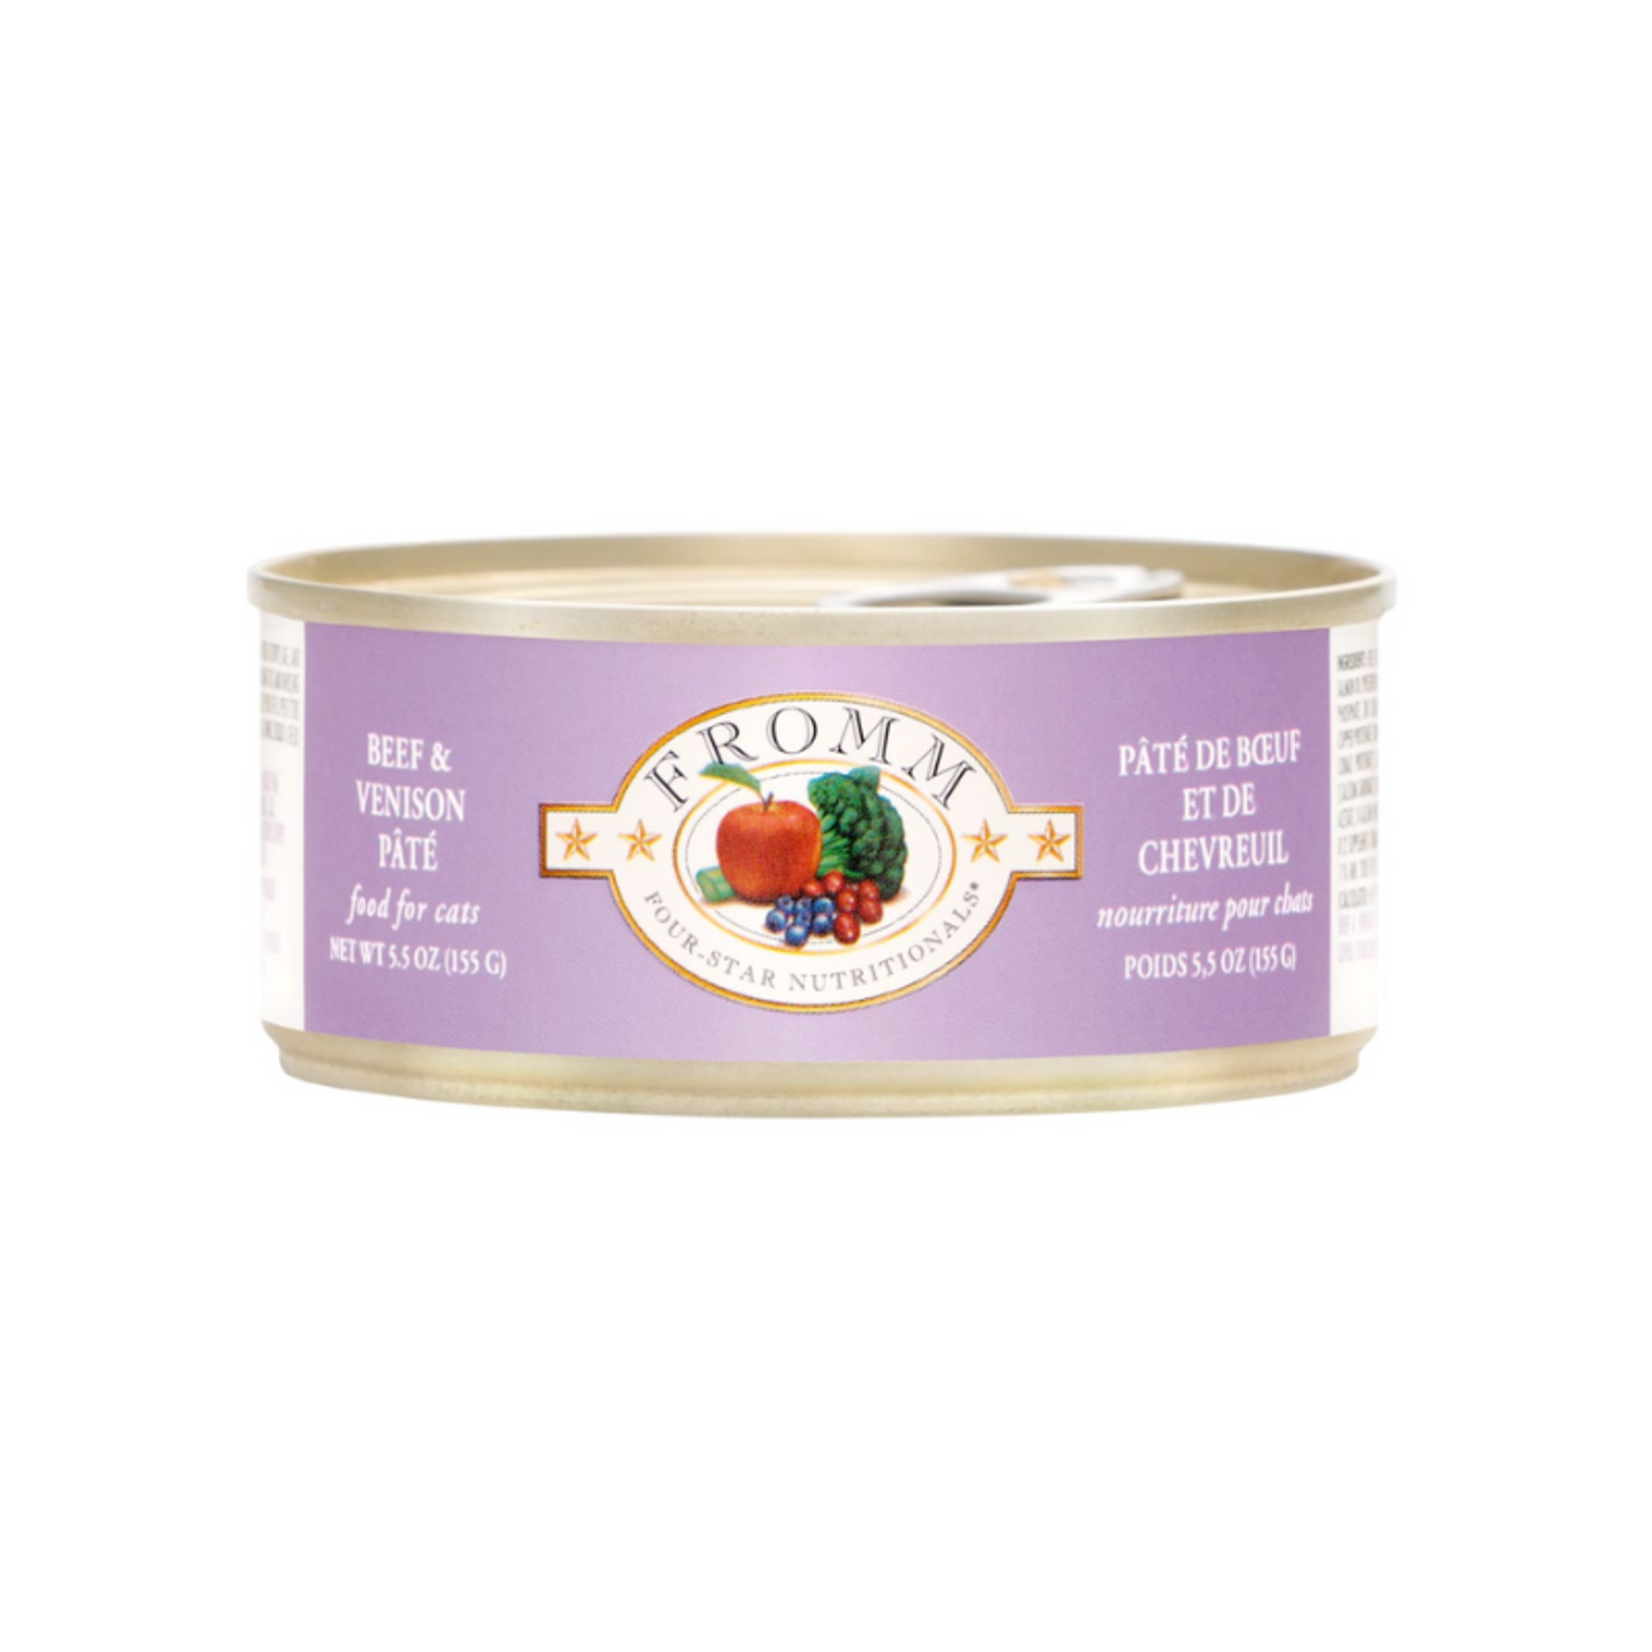 Fromm Four Star 5.5 oz. - Beef & Venison Pate - Fromm Four-Star - Cat